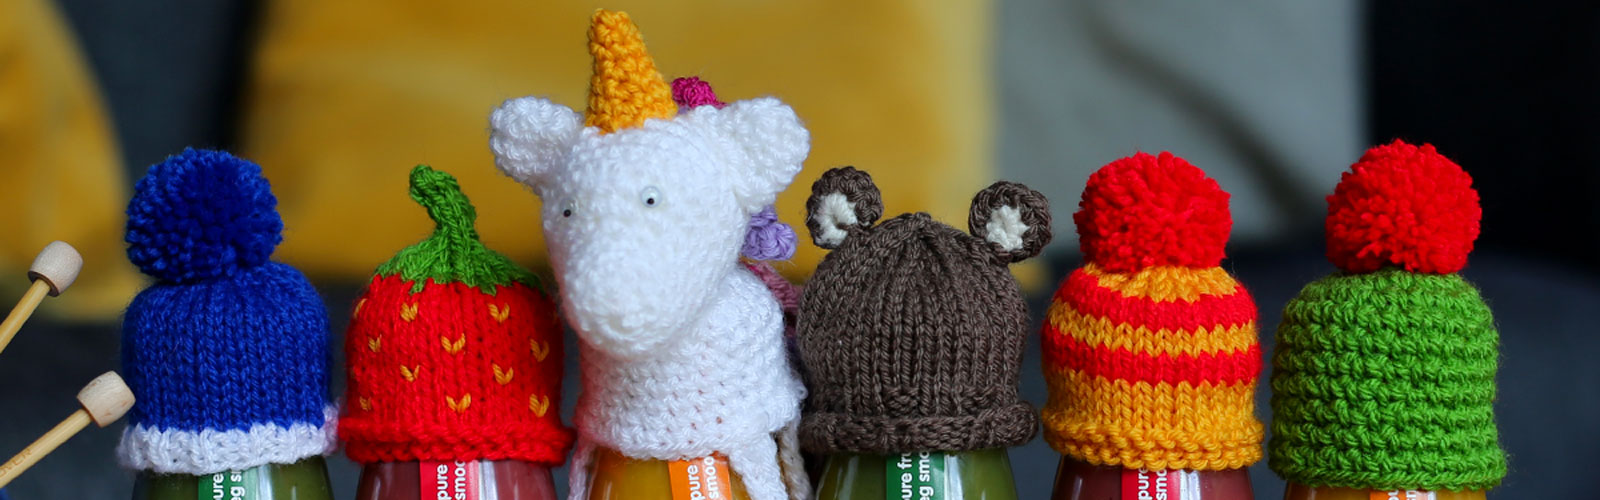 Knit for Charity - The Innocent Big Knit | Age UK